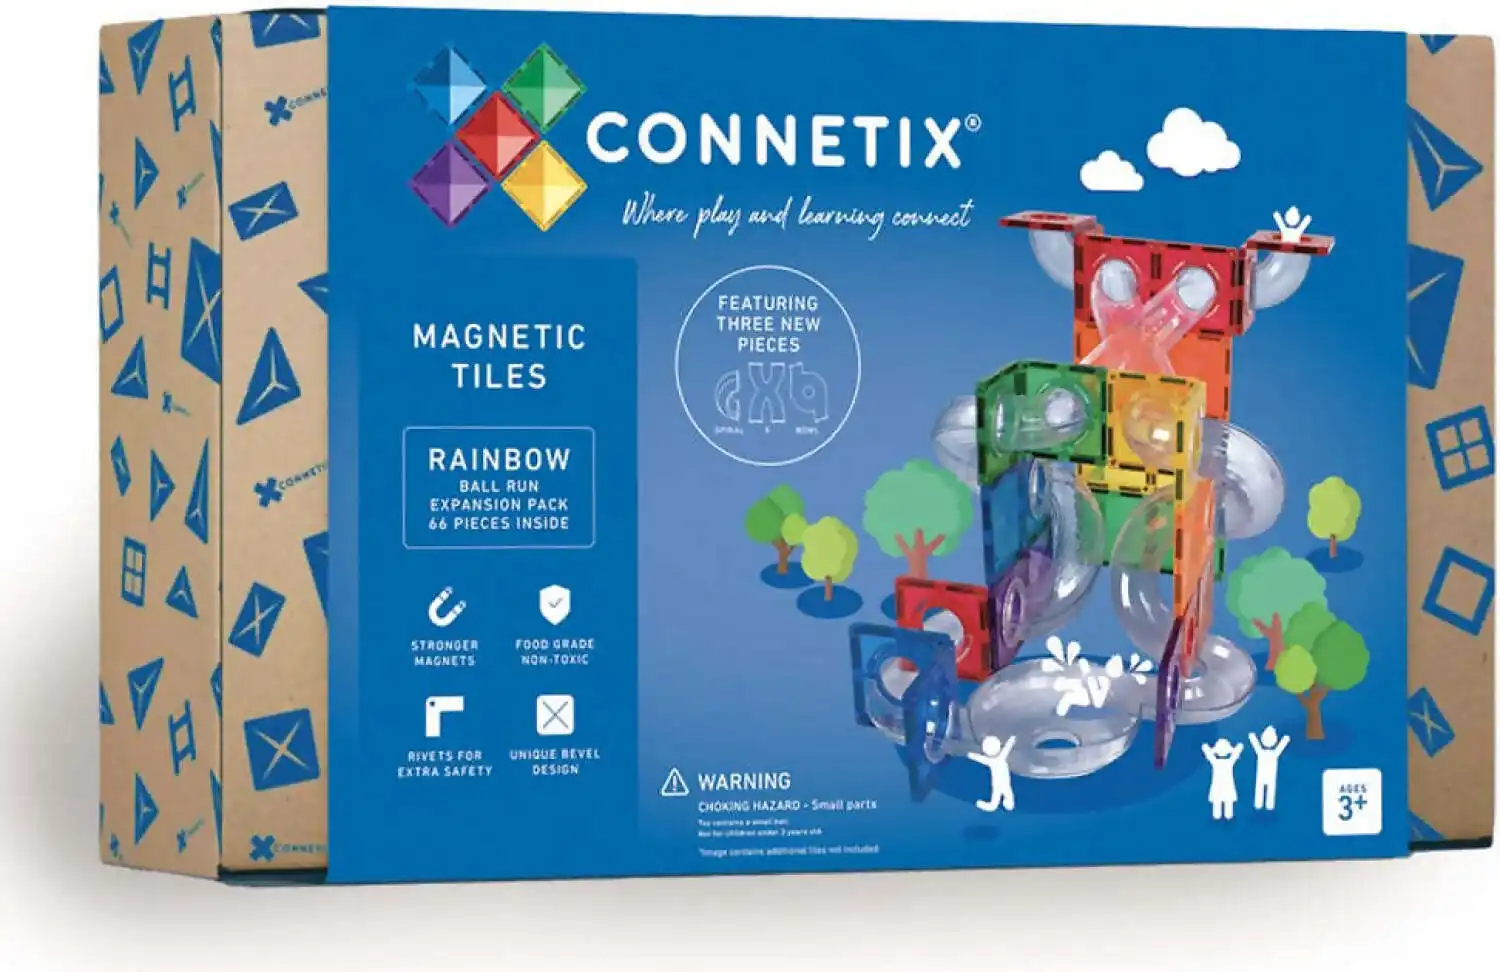 Connetix - Magnetic Tiles Rainbow Ball Run Expansion Pack 66pc